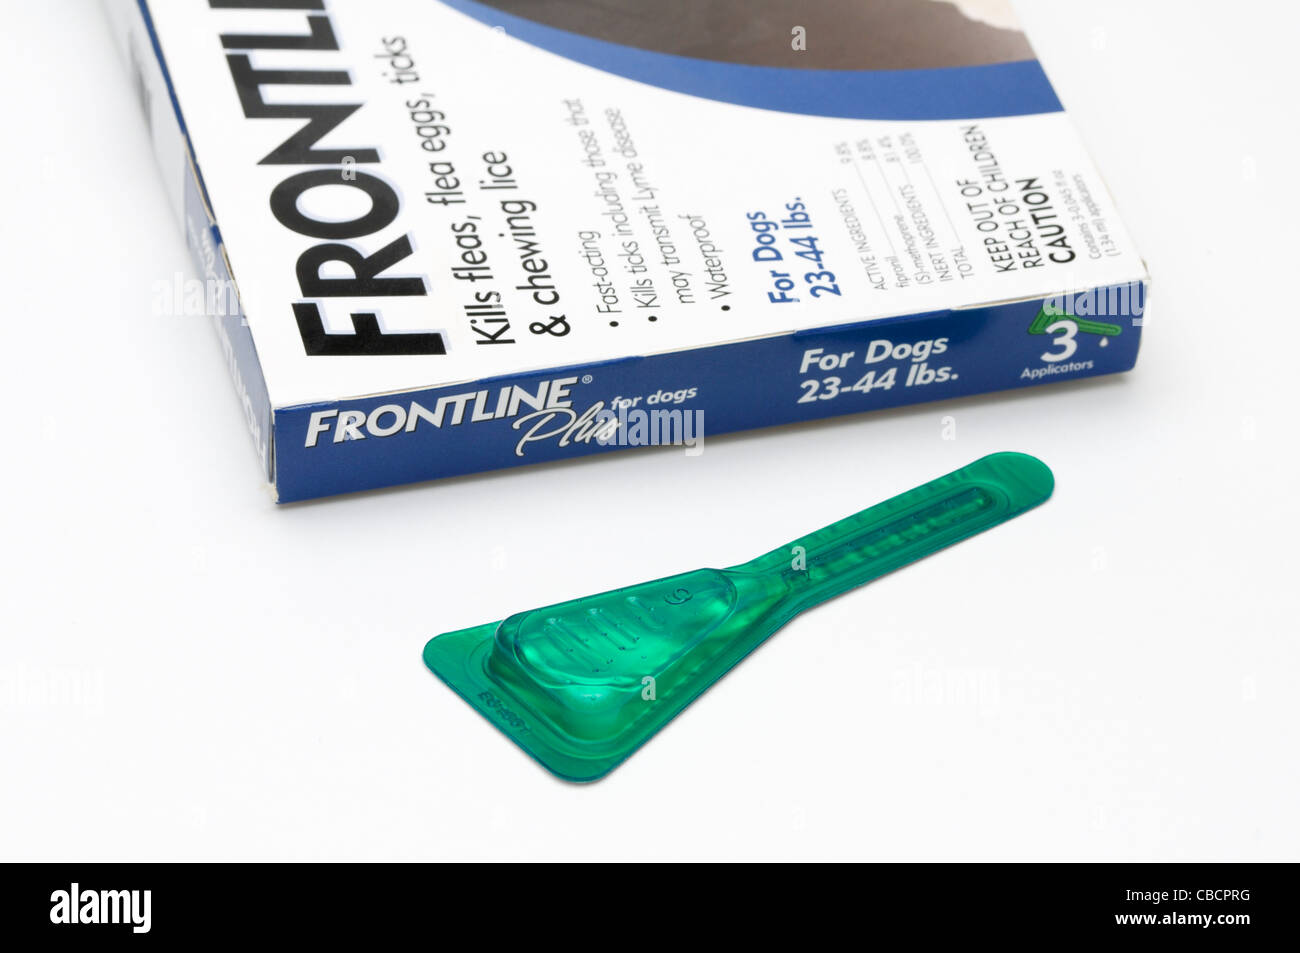 Frontline, flea and tick prevention topical medicine for dogs Stock Photo